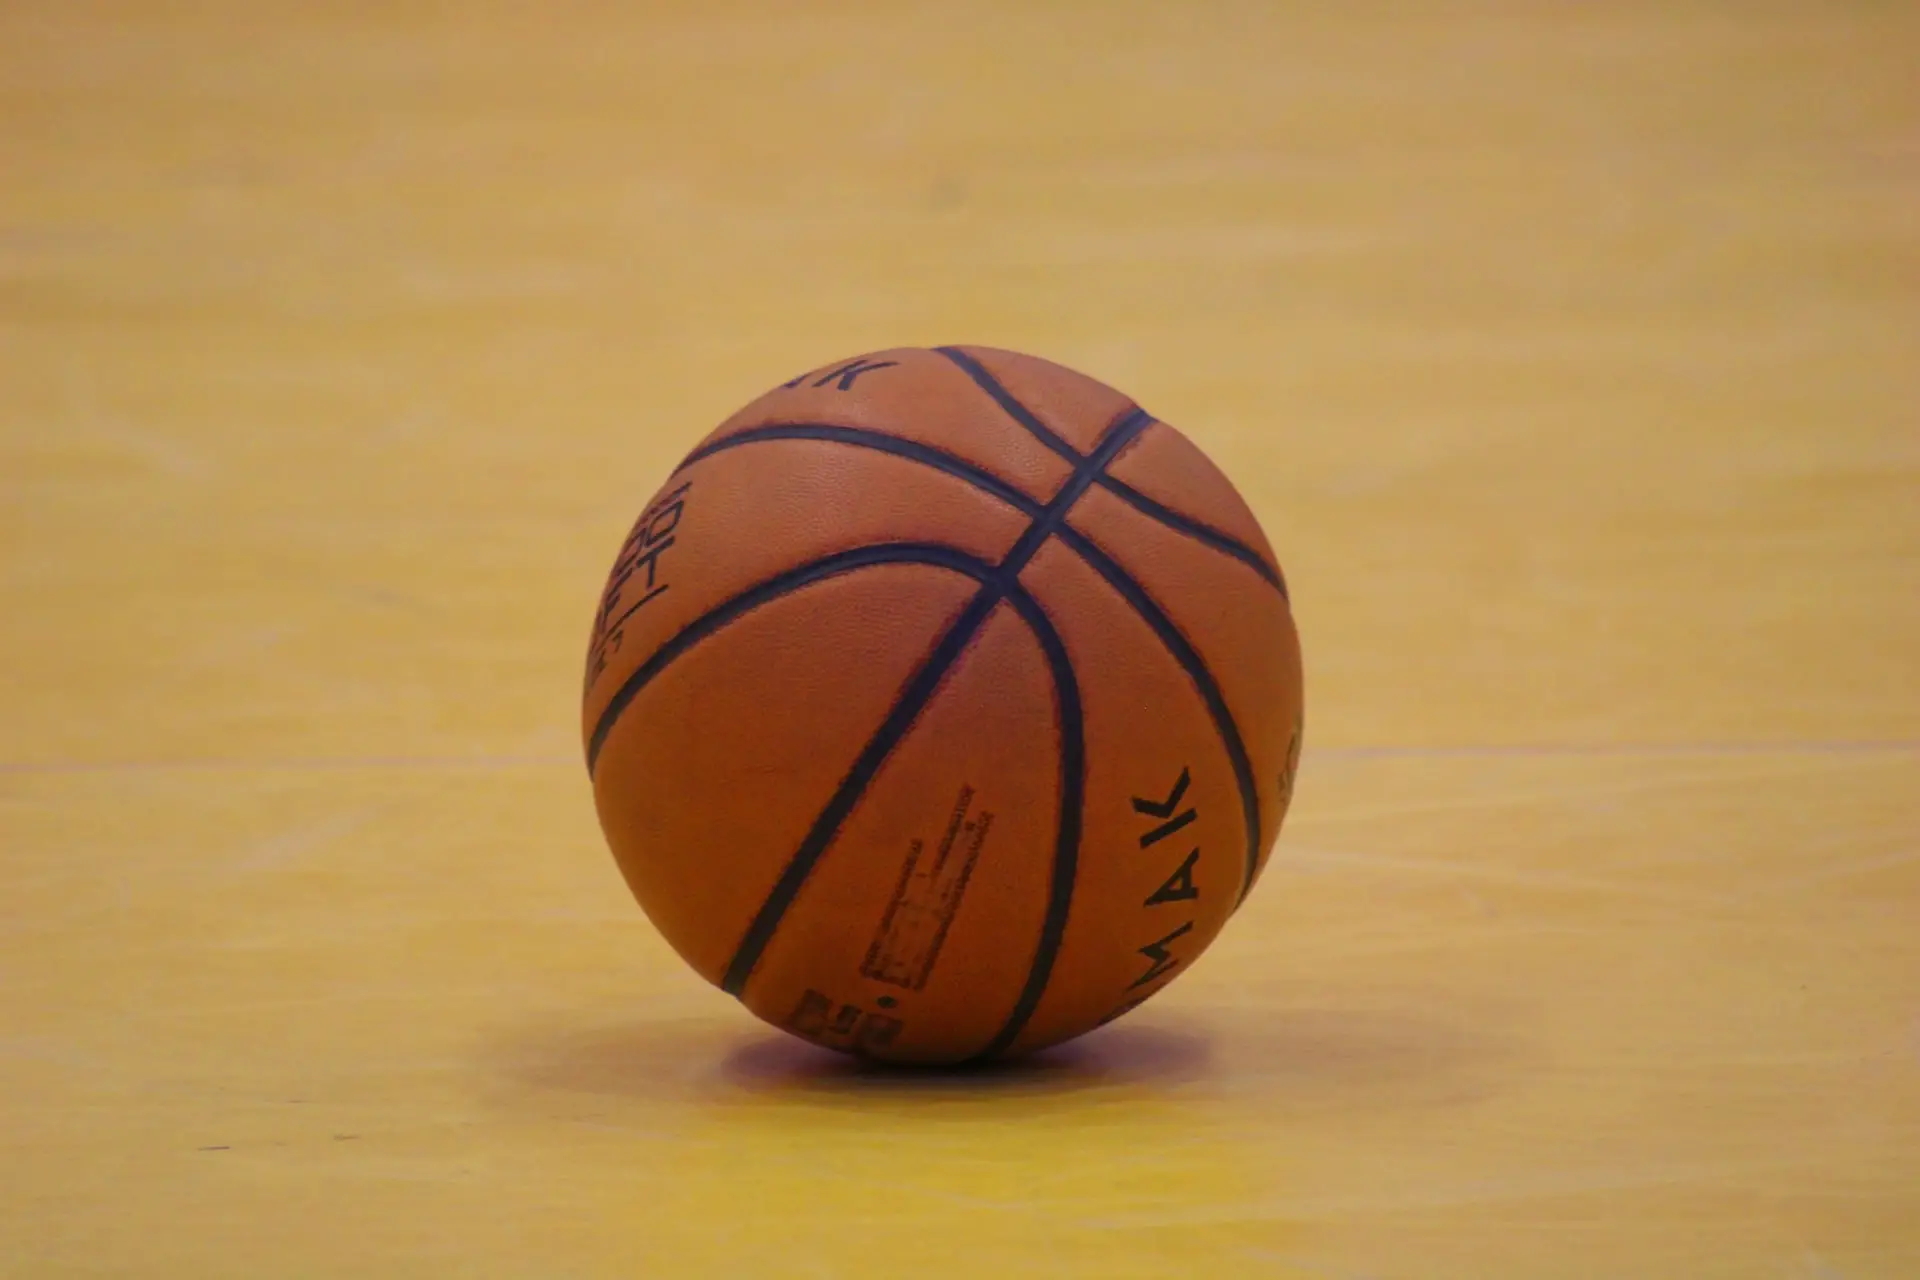 Why Does a Basketball Have Lines and Panels